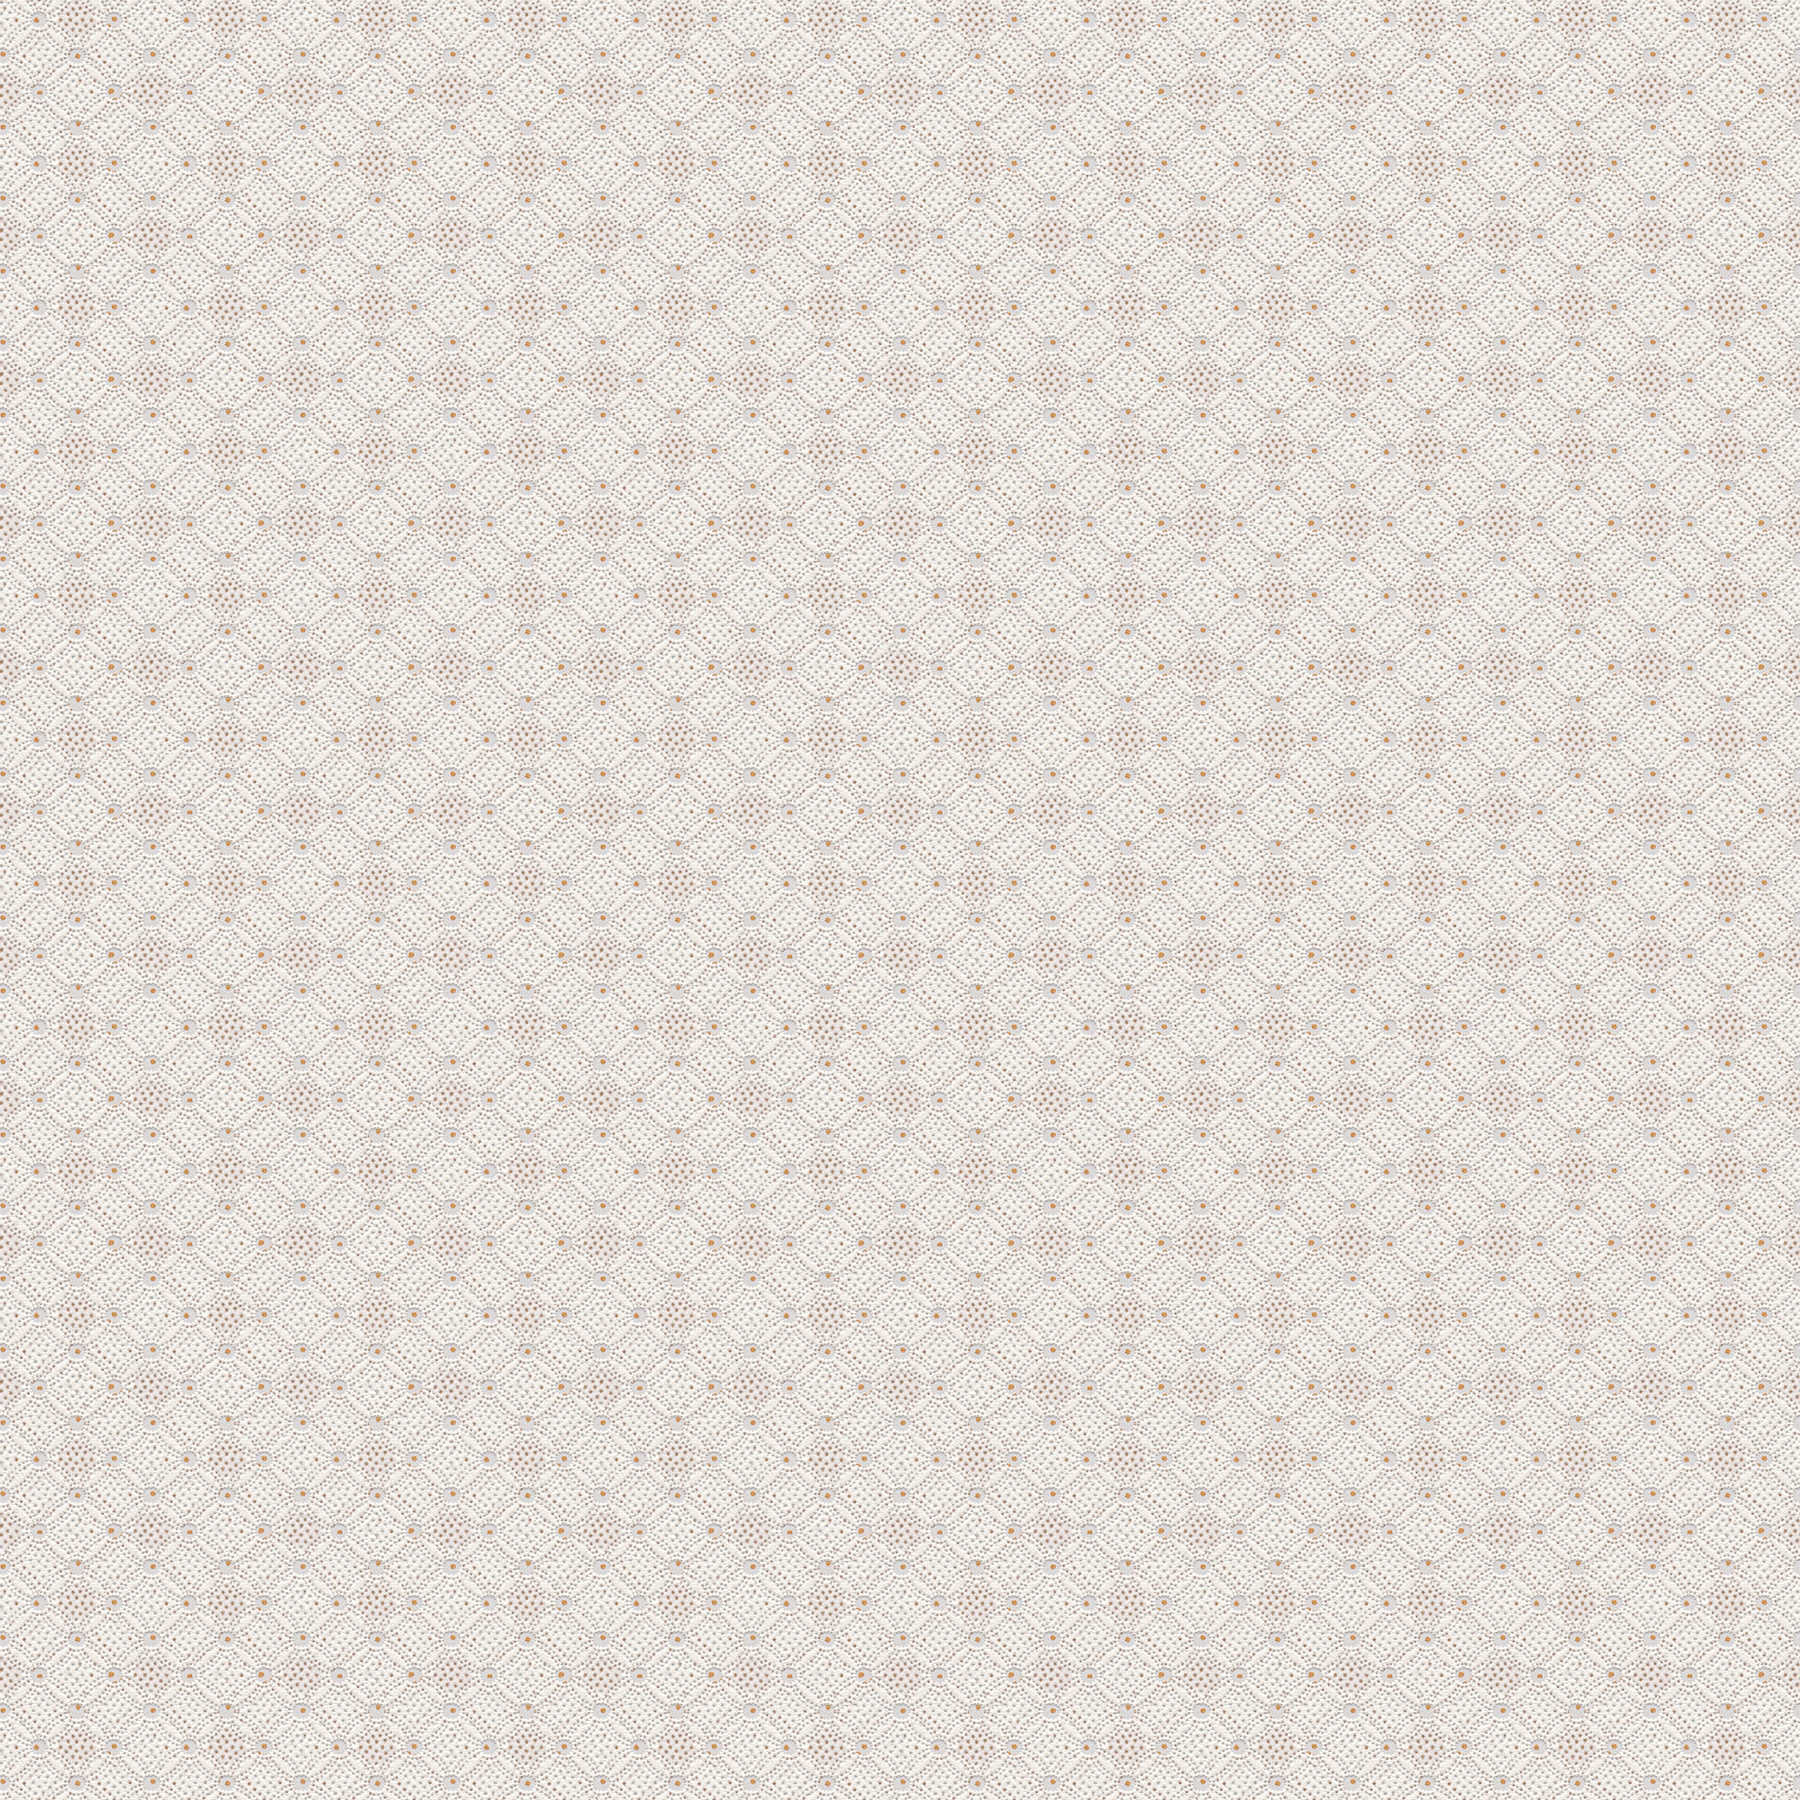 Structured wallpaper with diamond and dot pattern - cream, white, grey
